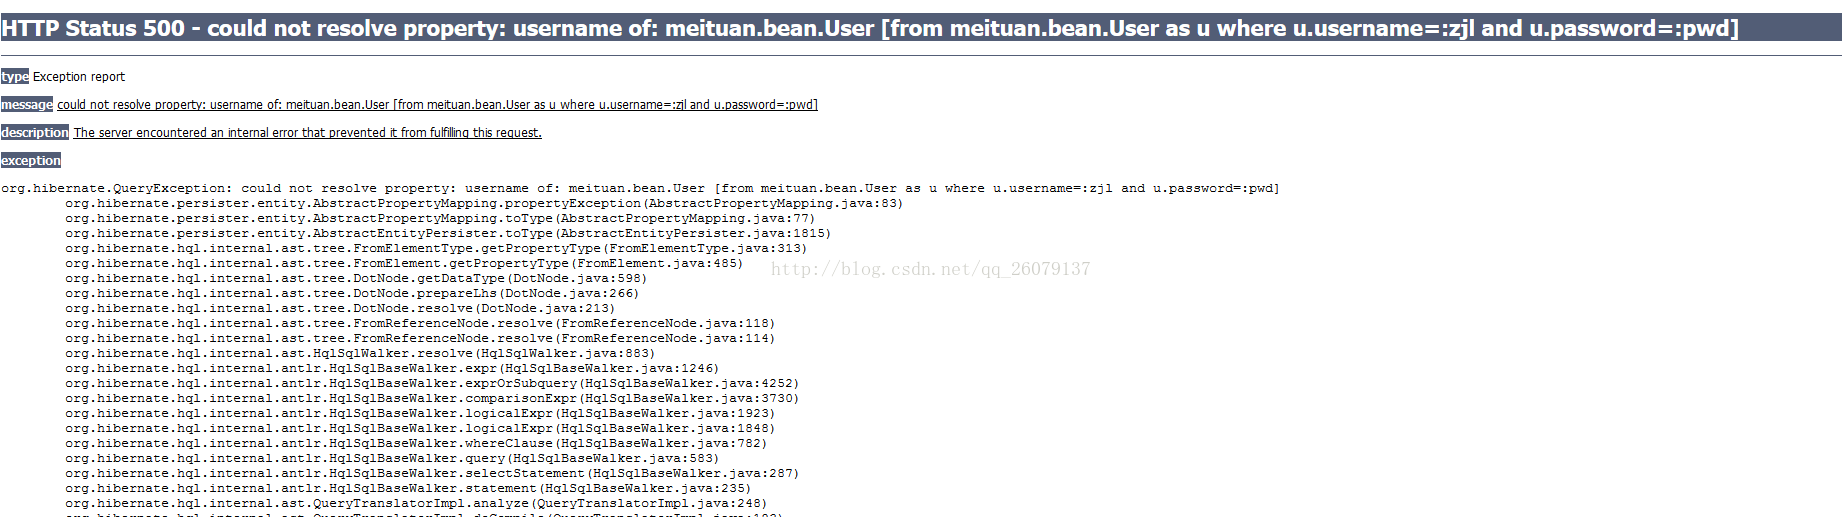 could not resolve property username of meituan.bean.User